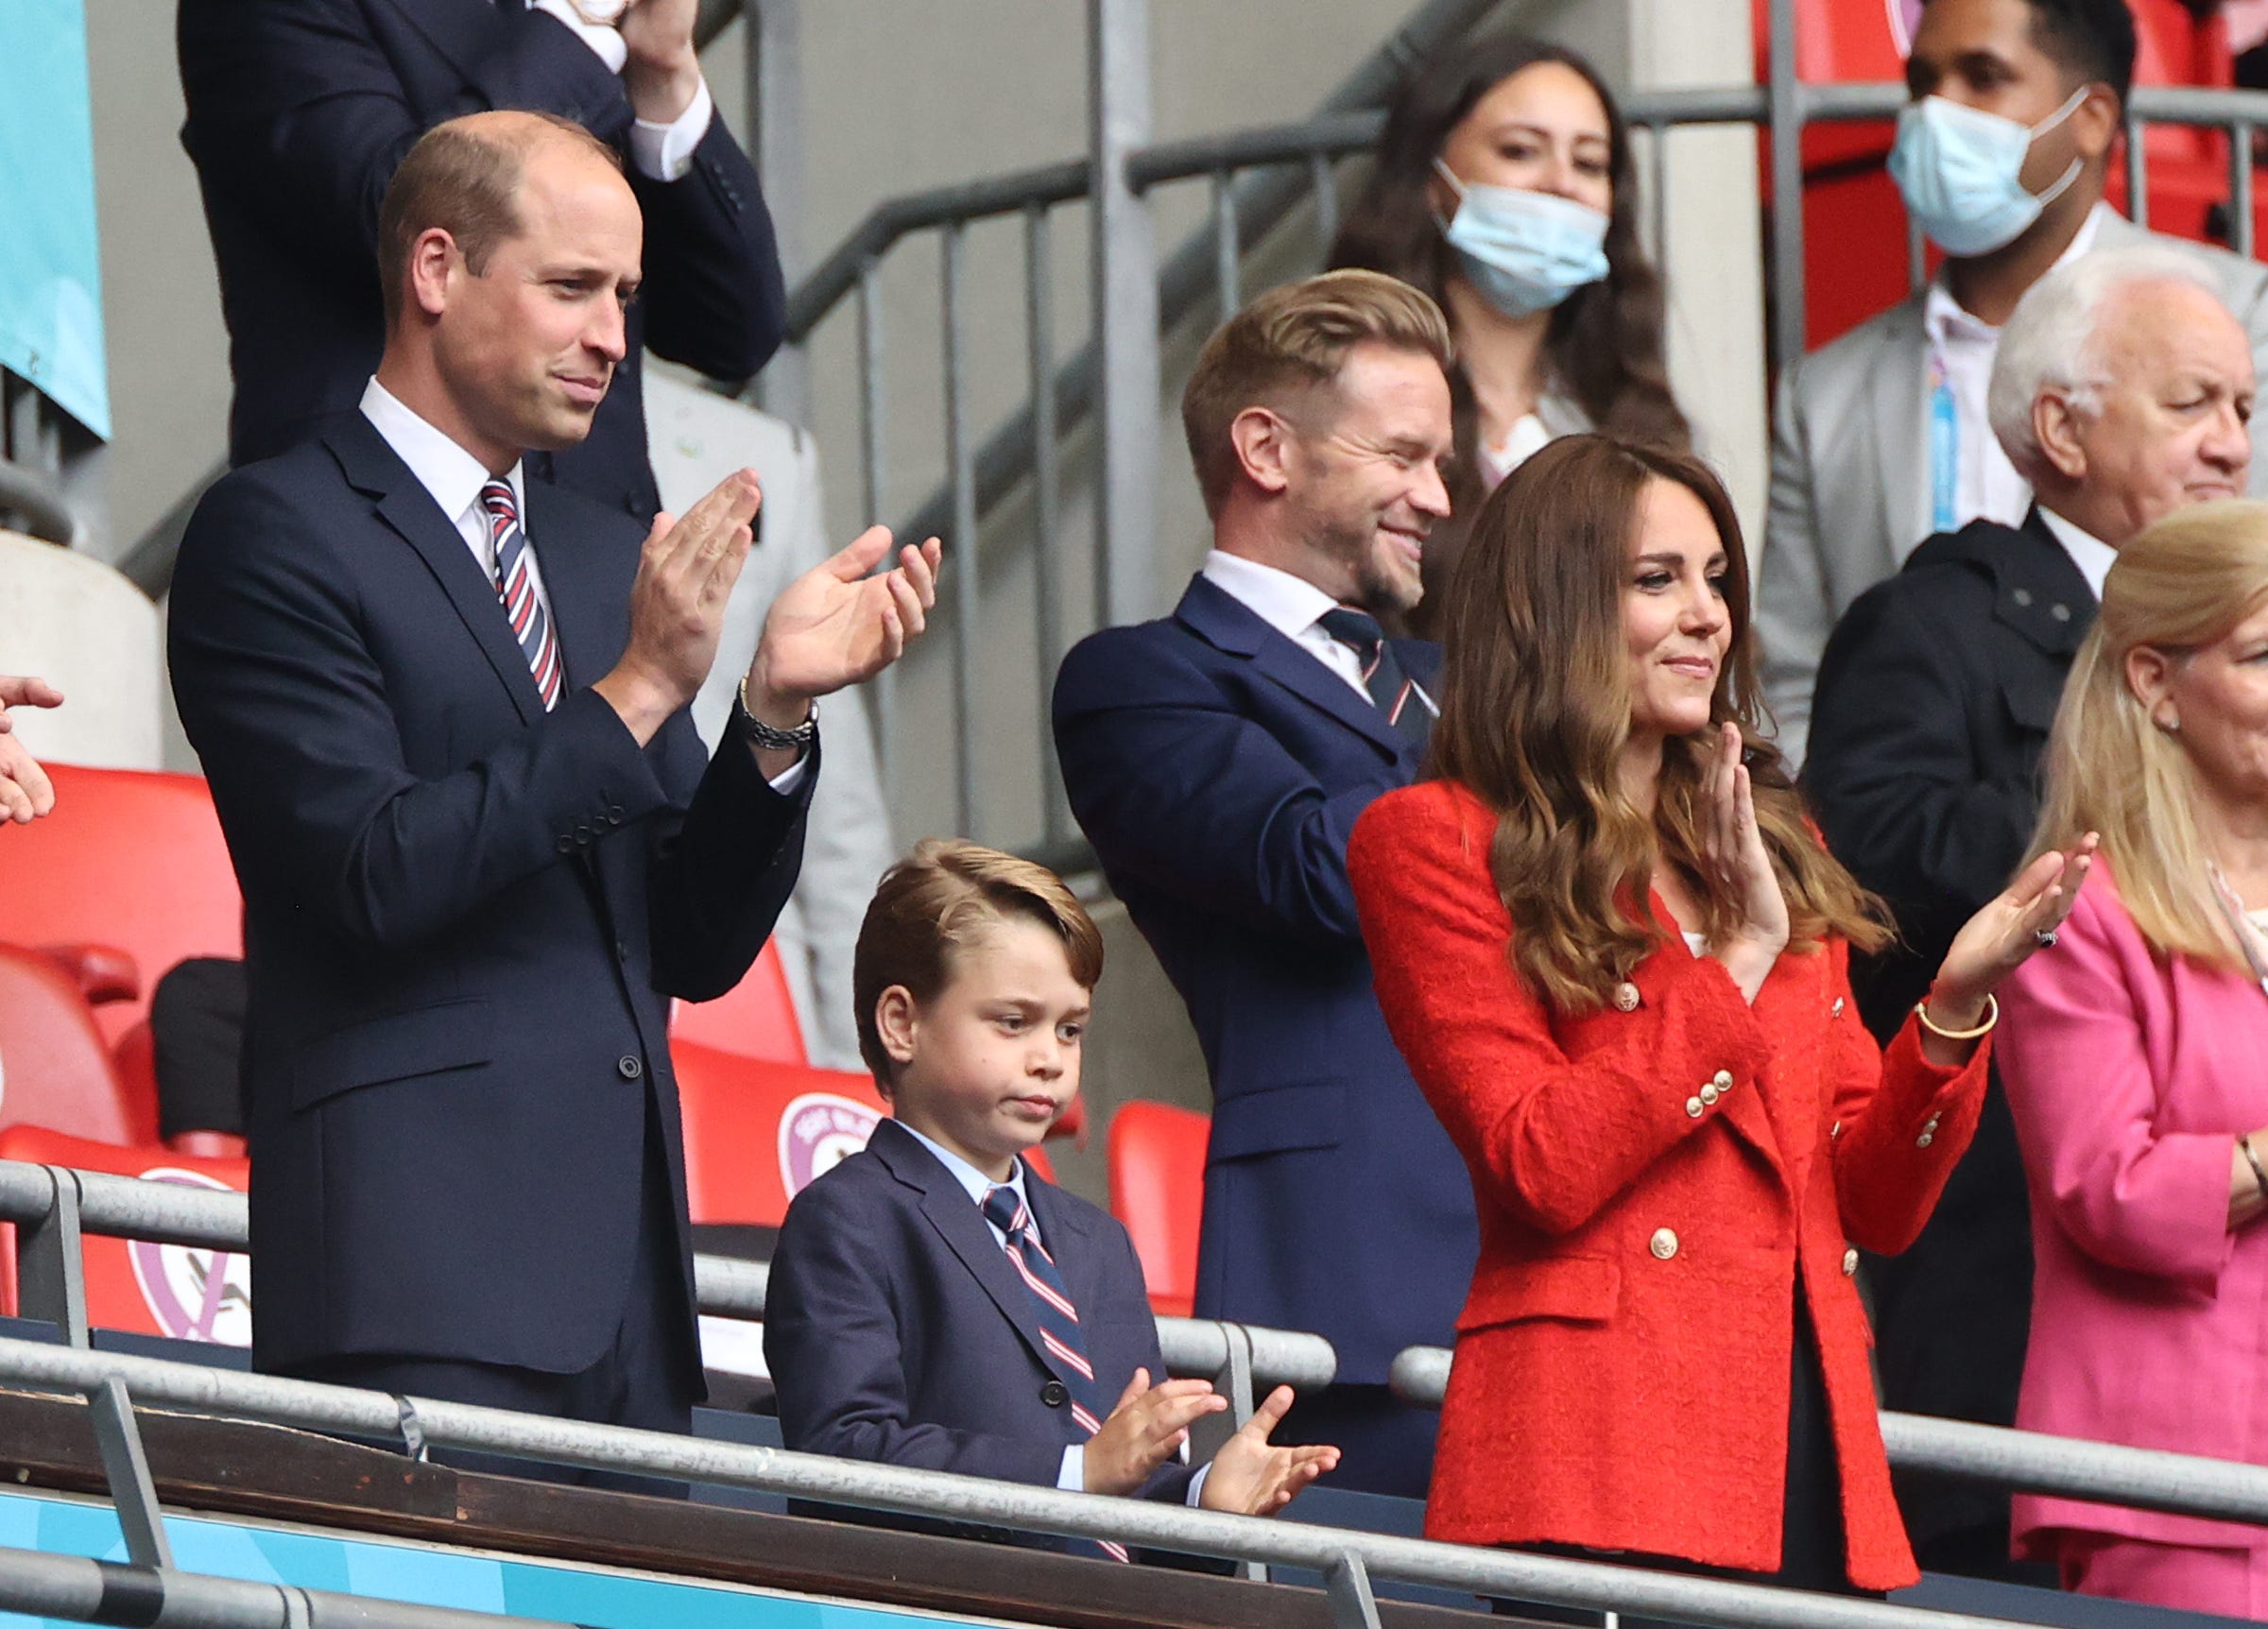 Prince William and his son Prince George wear matching suits at the Euro soccer match between England and Germany.